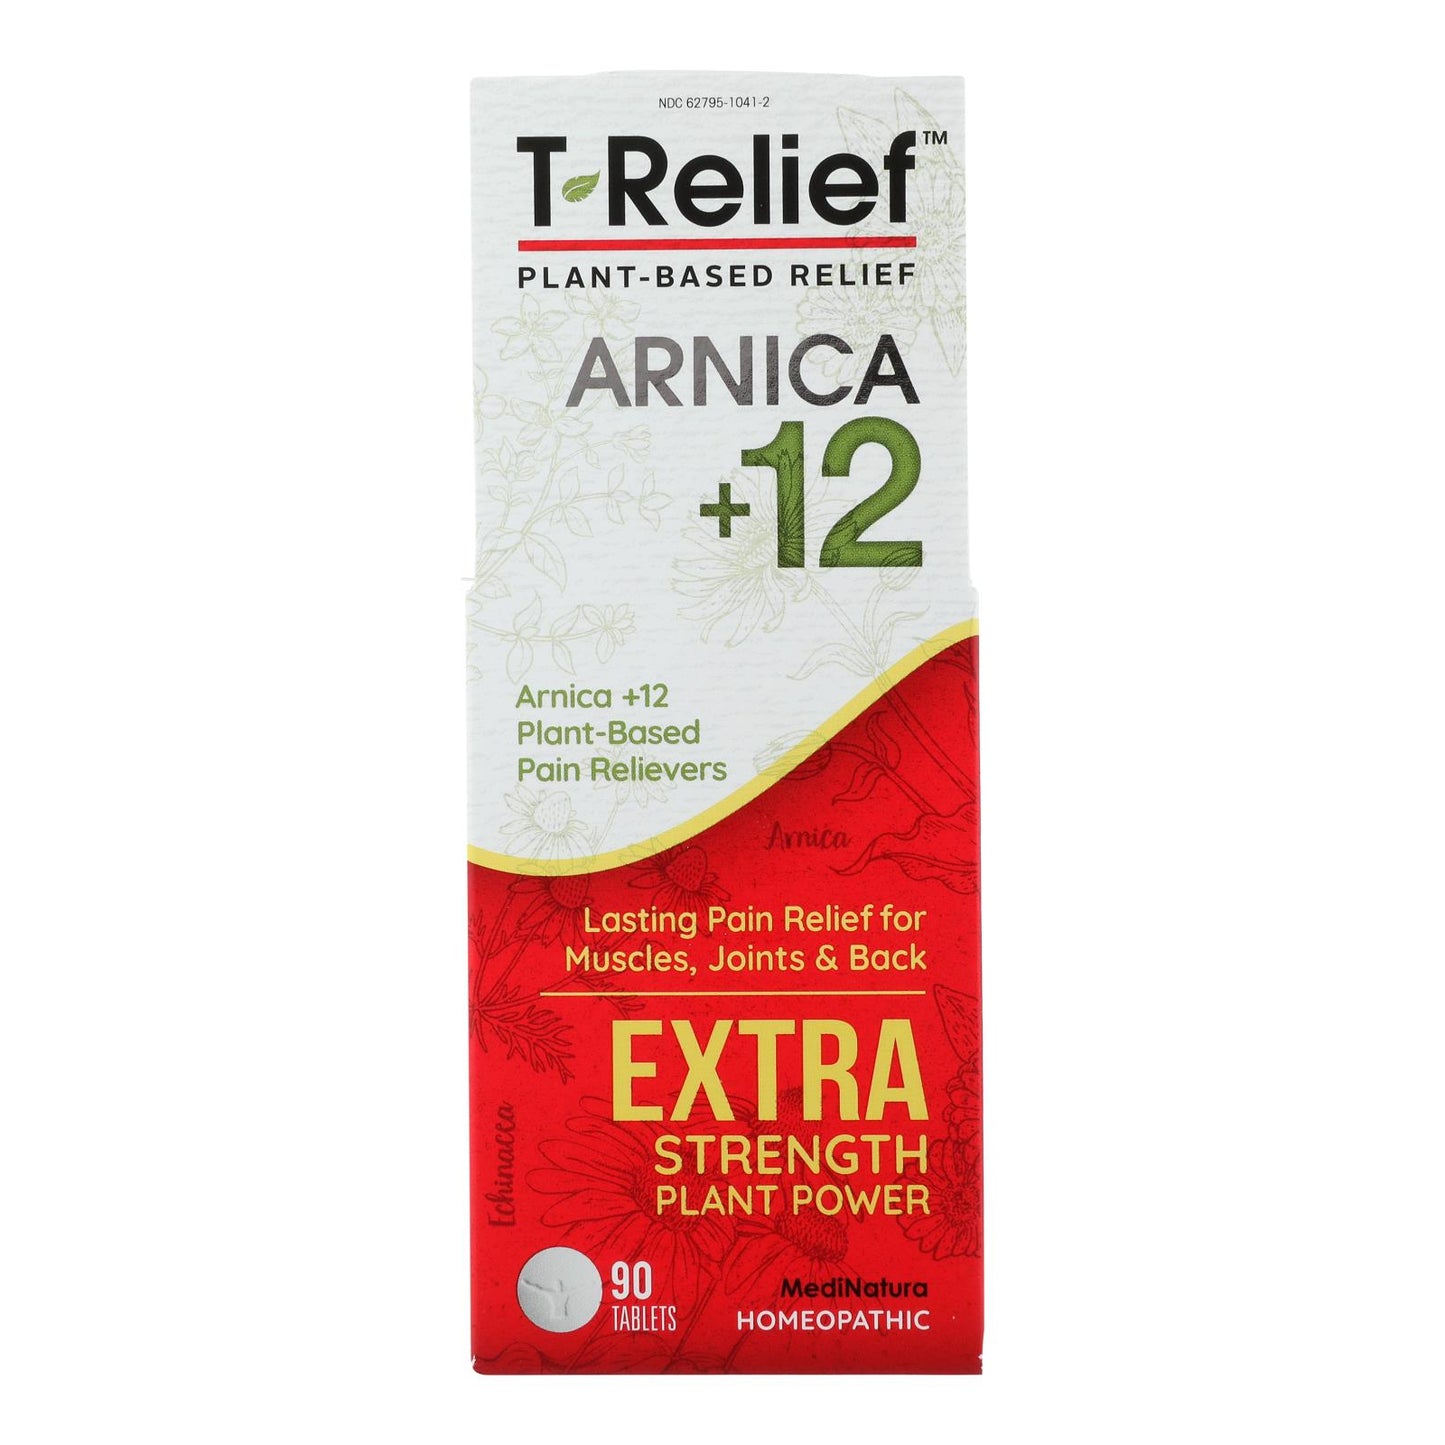 T-relief-medinatura Pain Relief Arnica 12 Xtra Str, 100 Tablets